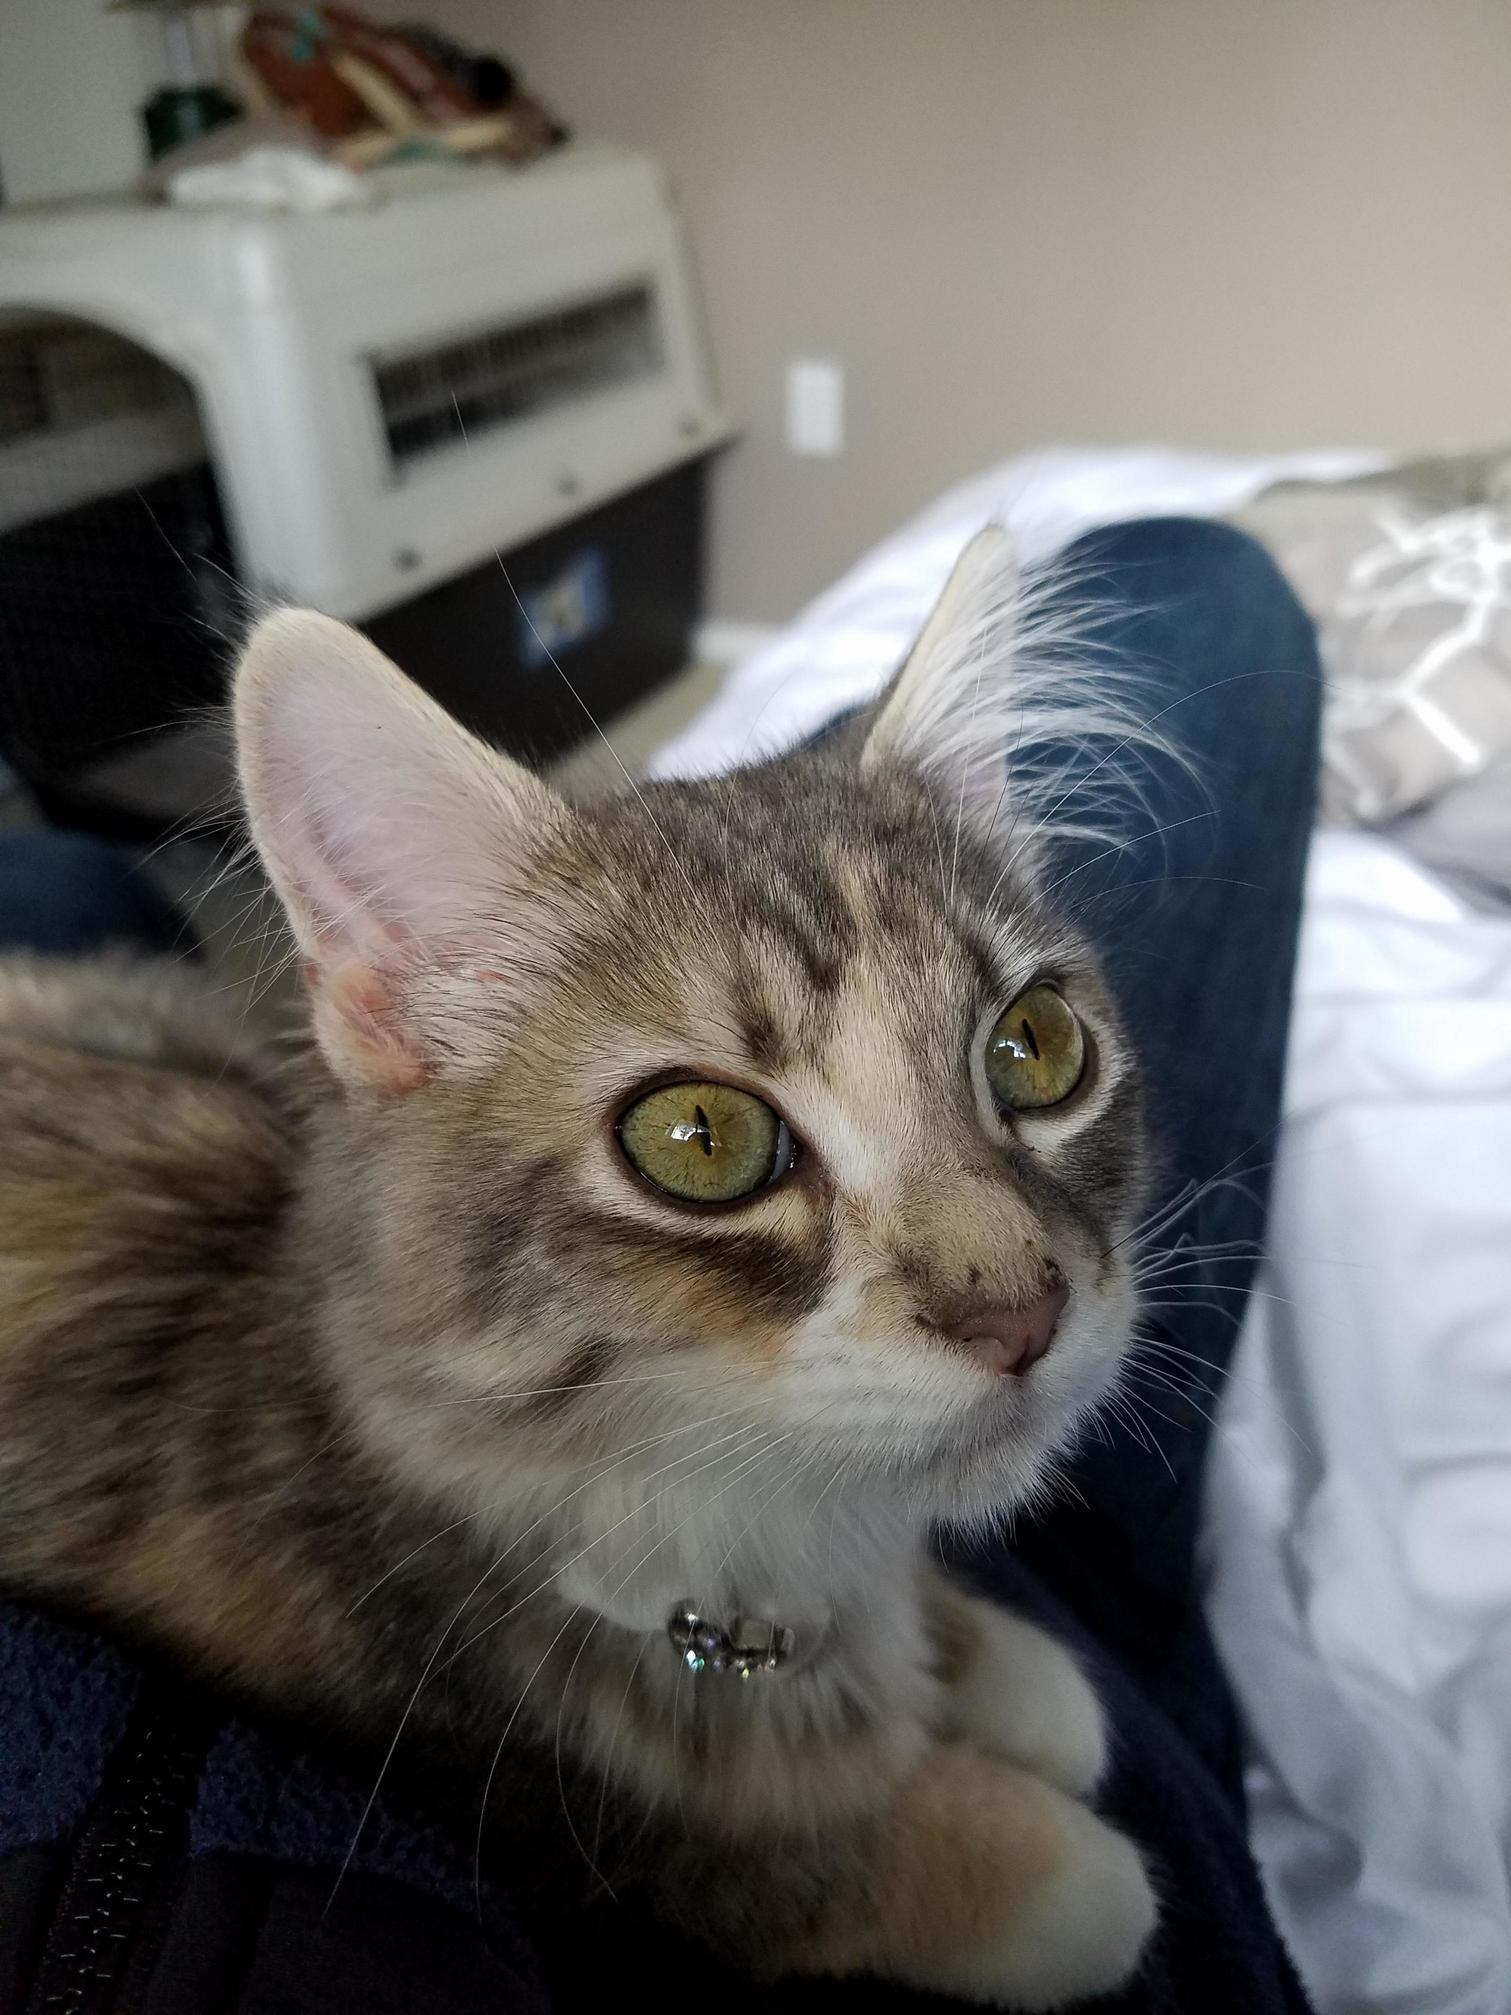 After growing up in a family allergic to cats, a week ago i adopted my first four legged friend. her names stella.